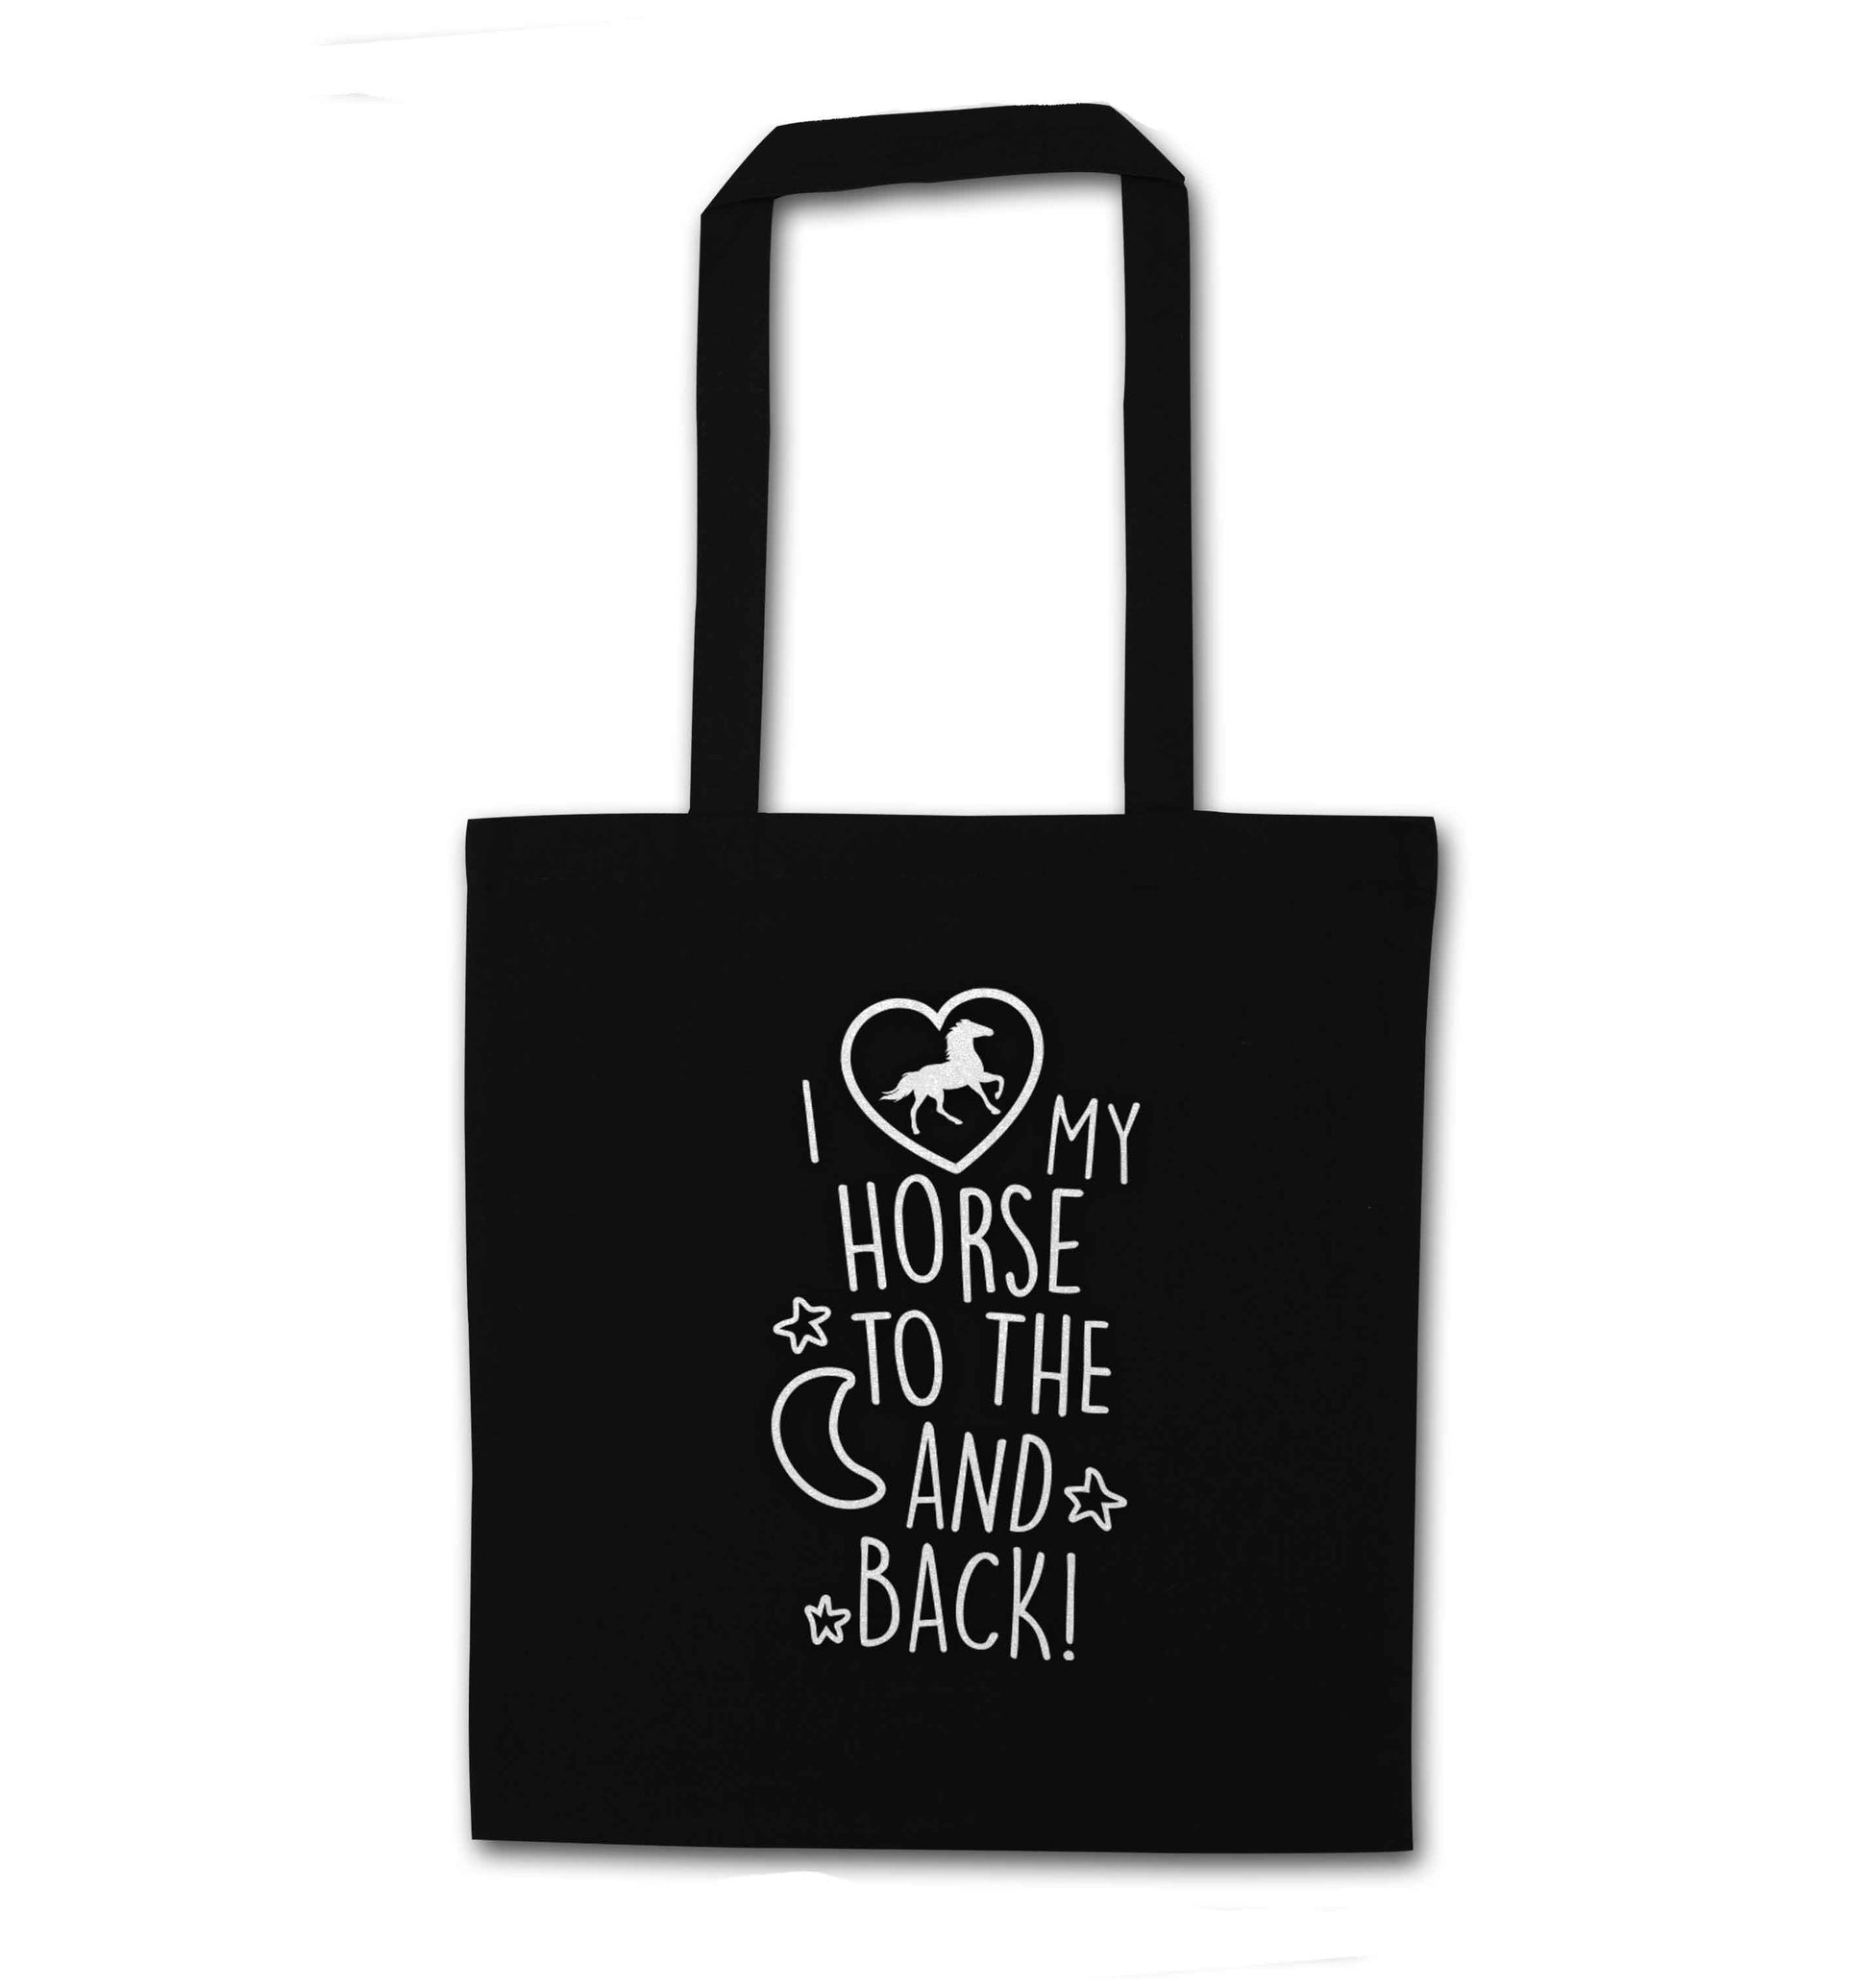 I love my horse to the moon and back black tote bag